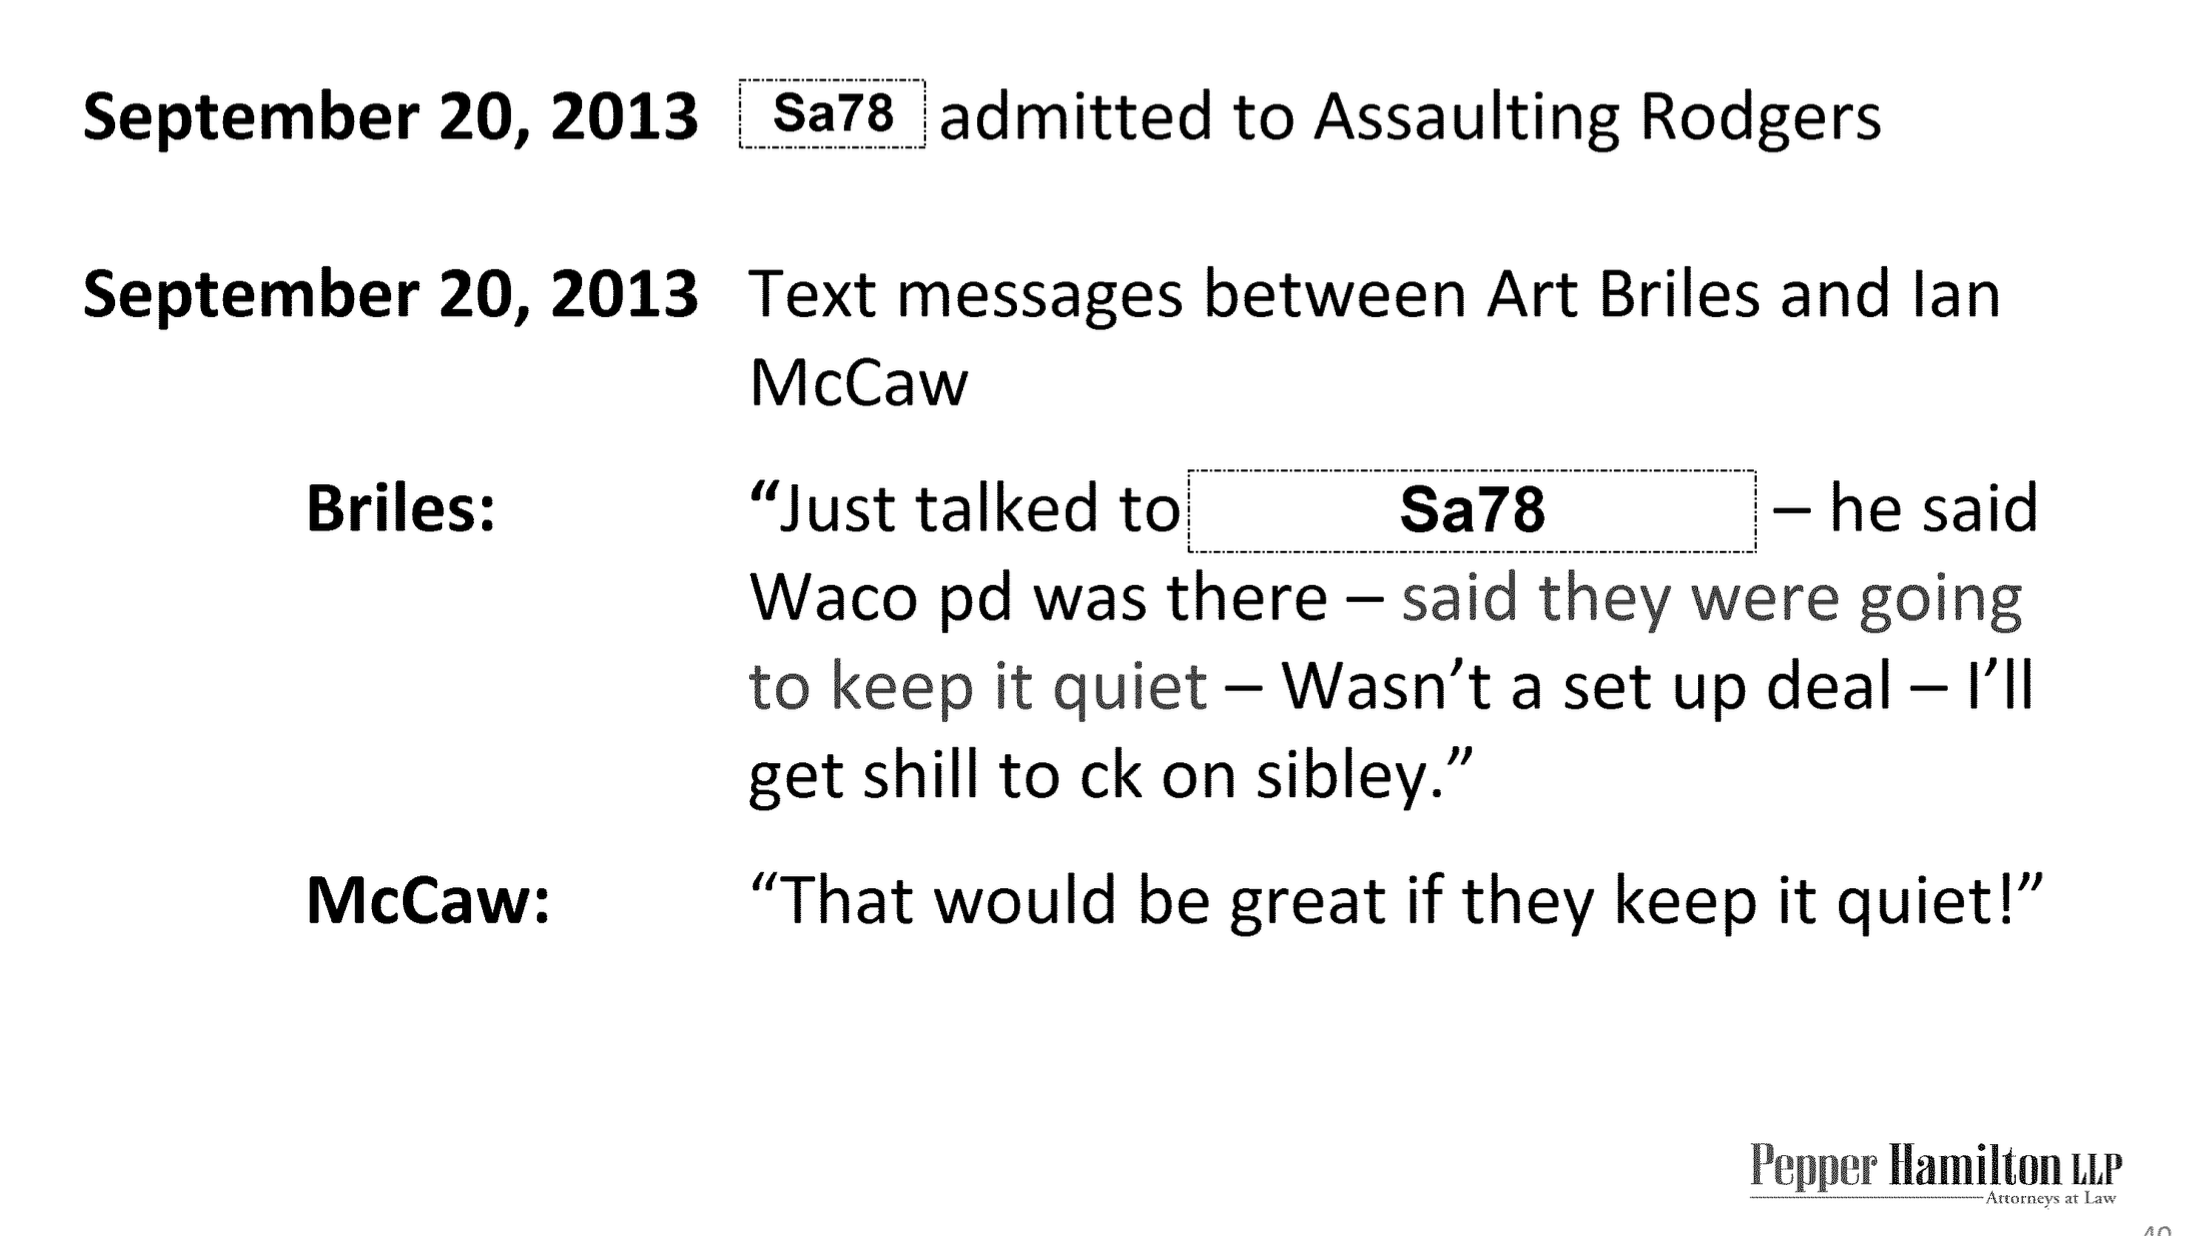 A screenshot of a text message exchange between Art Briles and Ian McCaw, as shown on a PowerPoint presentation. It says: "September 20, 2013 text messages between Art Briles and Ian McCawn." Briles: "Just talked to [Sa78]—he said Waco PD was there—said they were going to keep it quiet—Wasn't a set up deal—I'll get shill to ck on sibley." McCaw: "That would be great if they keep it quiet!"